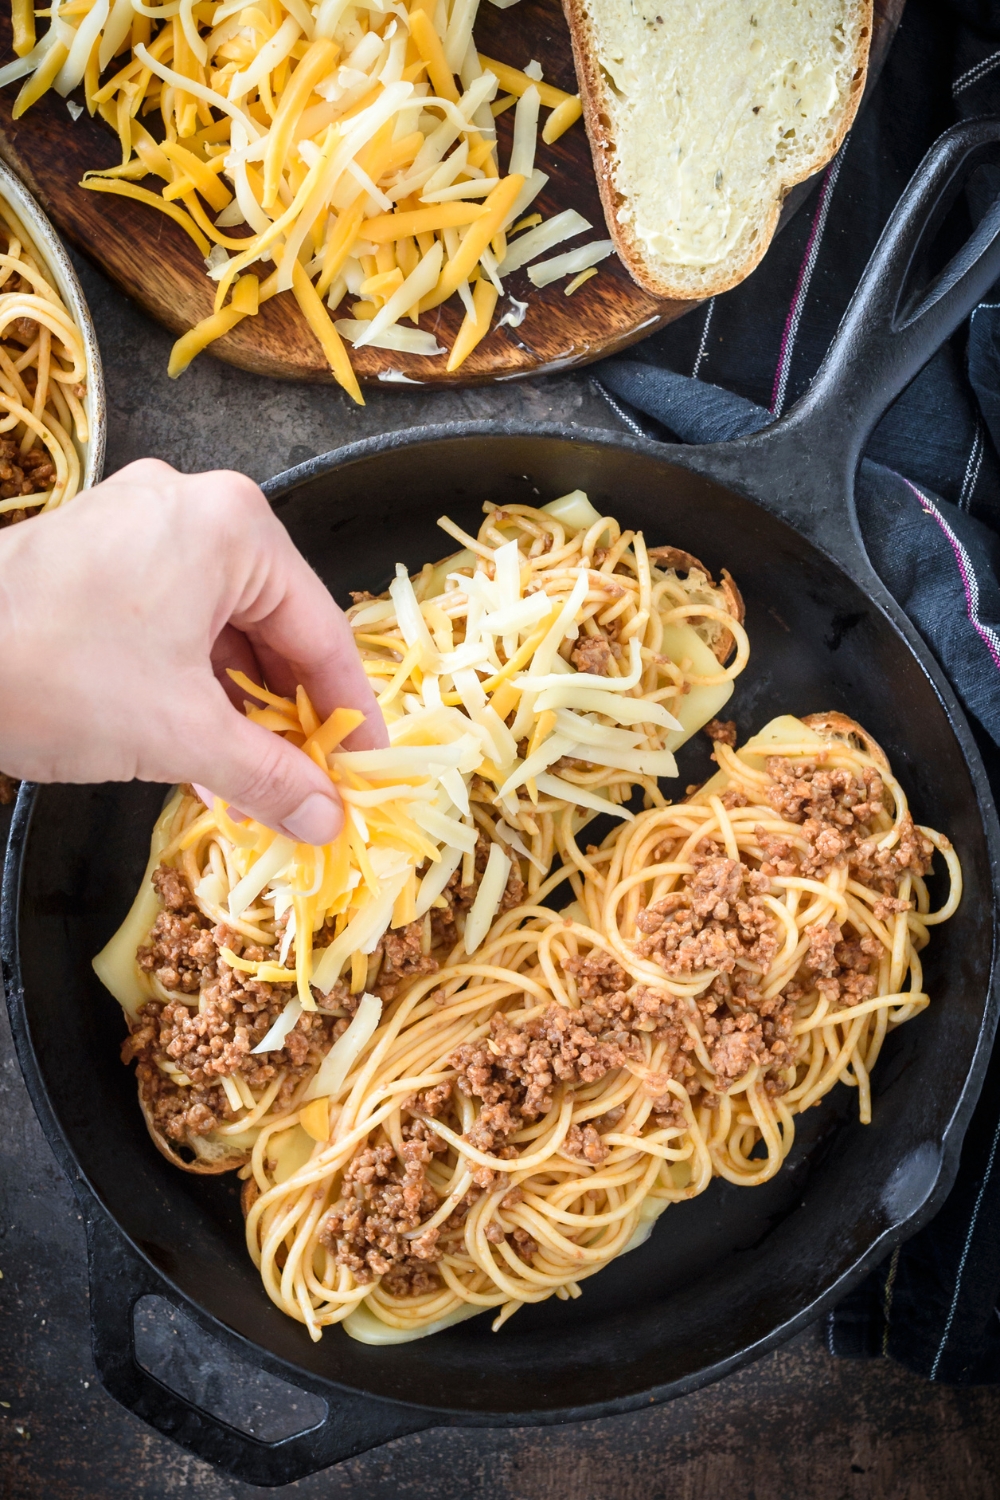 A hand spreading shredded cheese over the top of two spaghetti sandwiches.